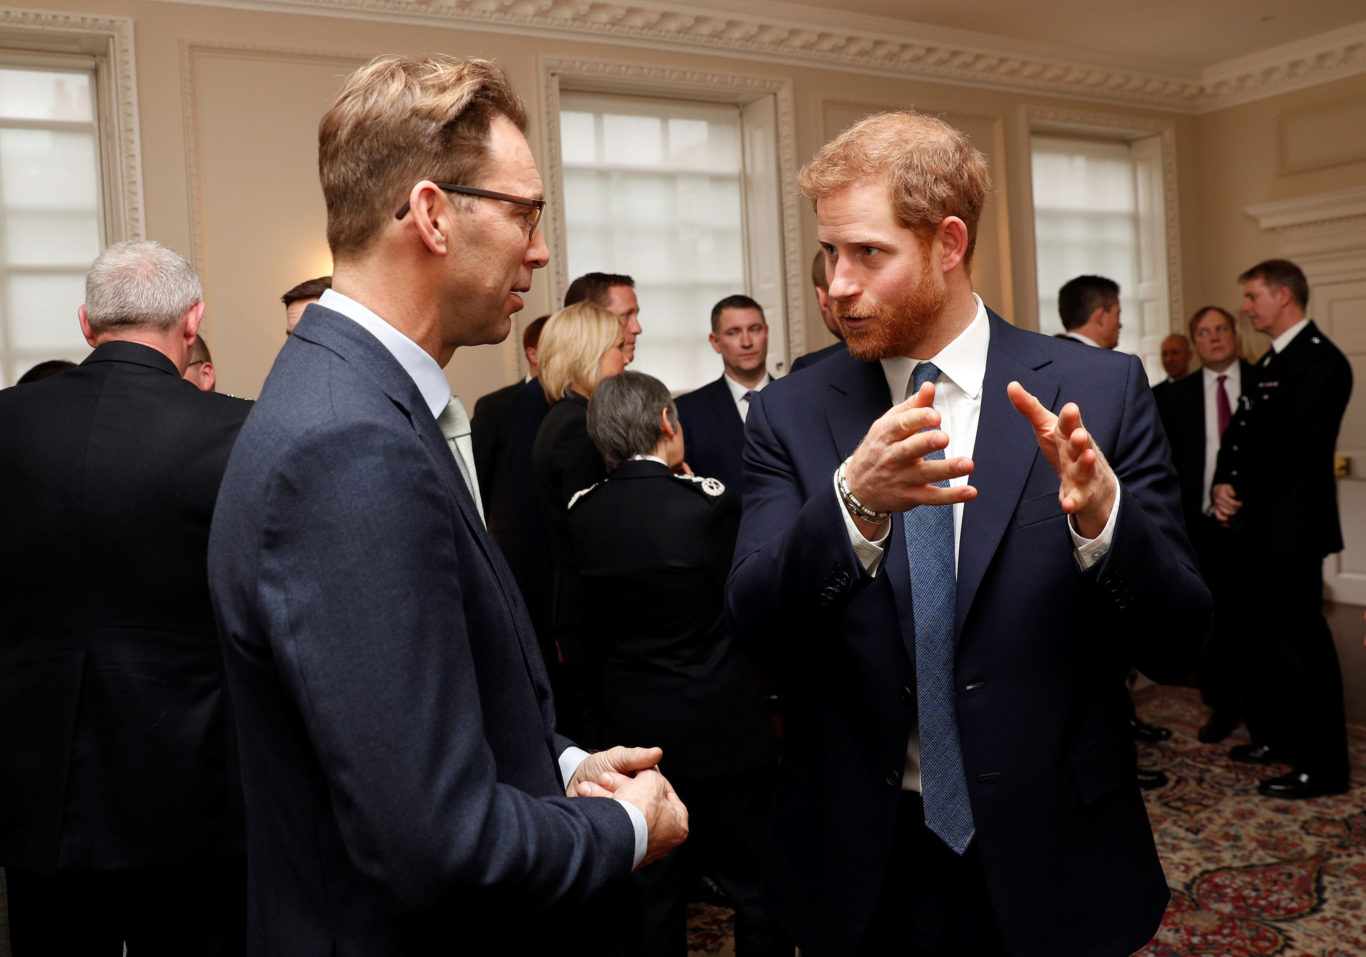 Prince Harry talks to Tobias Ellwood, who received a police bravery award at the Met Excellence Awards (Adrian Dennis/PA)